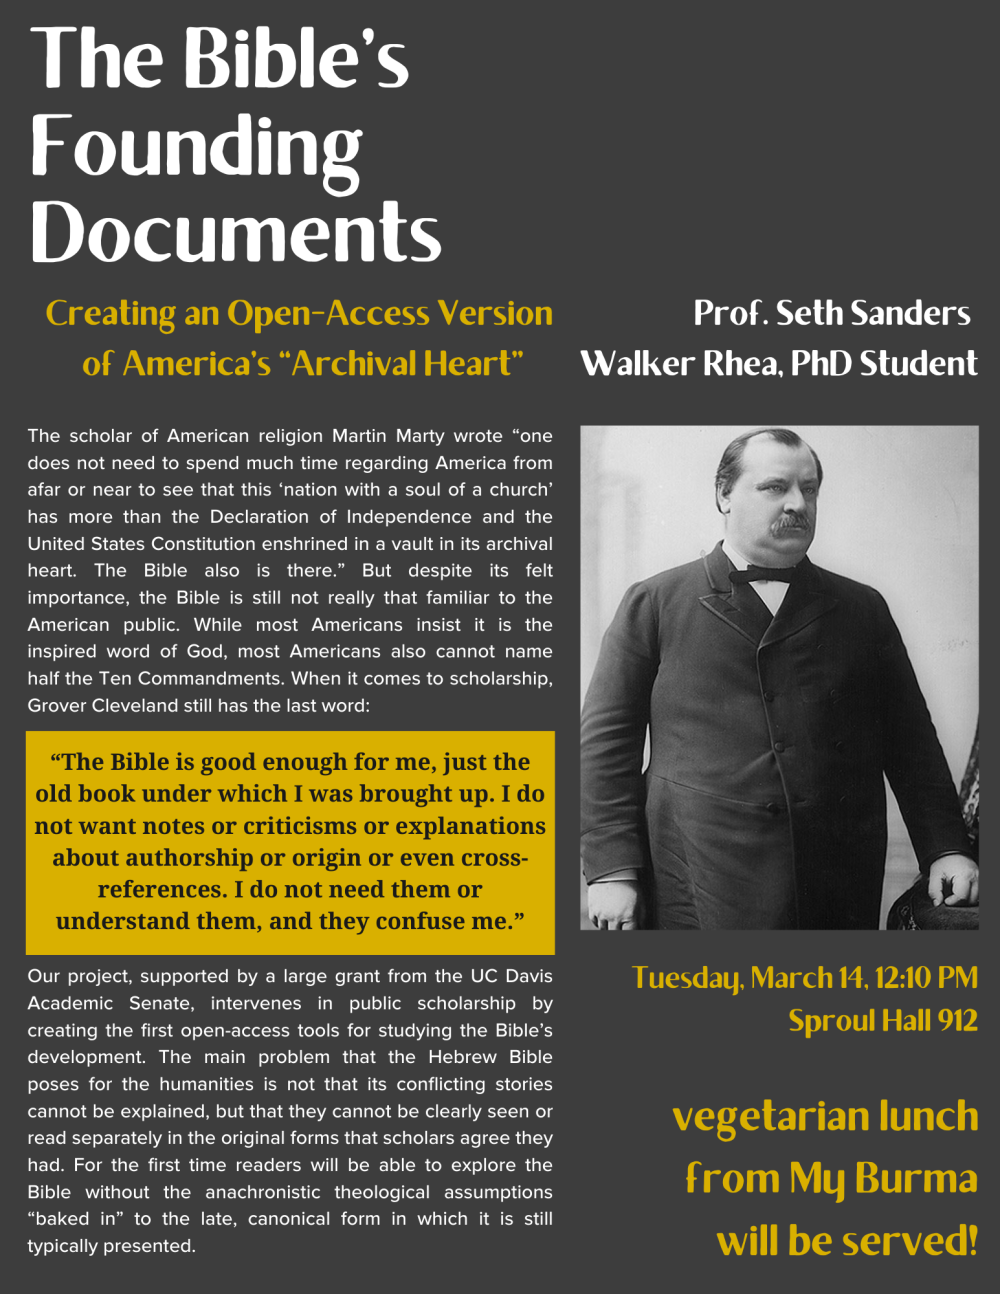 A flyer for the event with a photo of Grover Cleveland